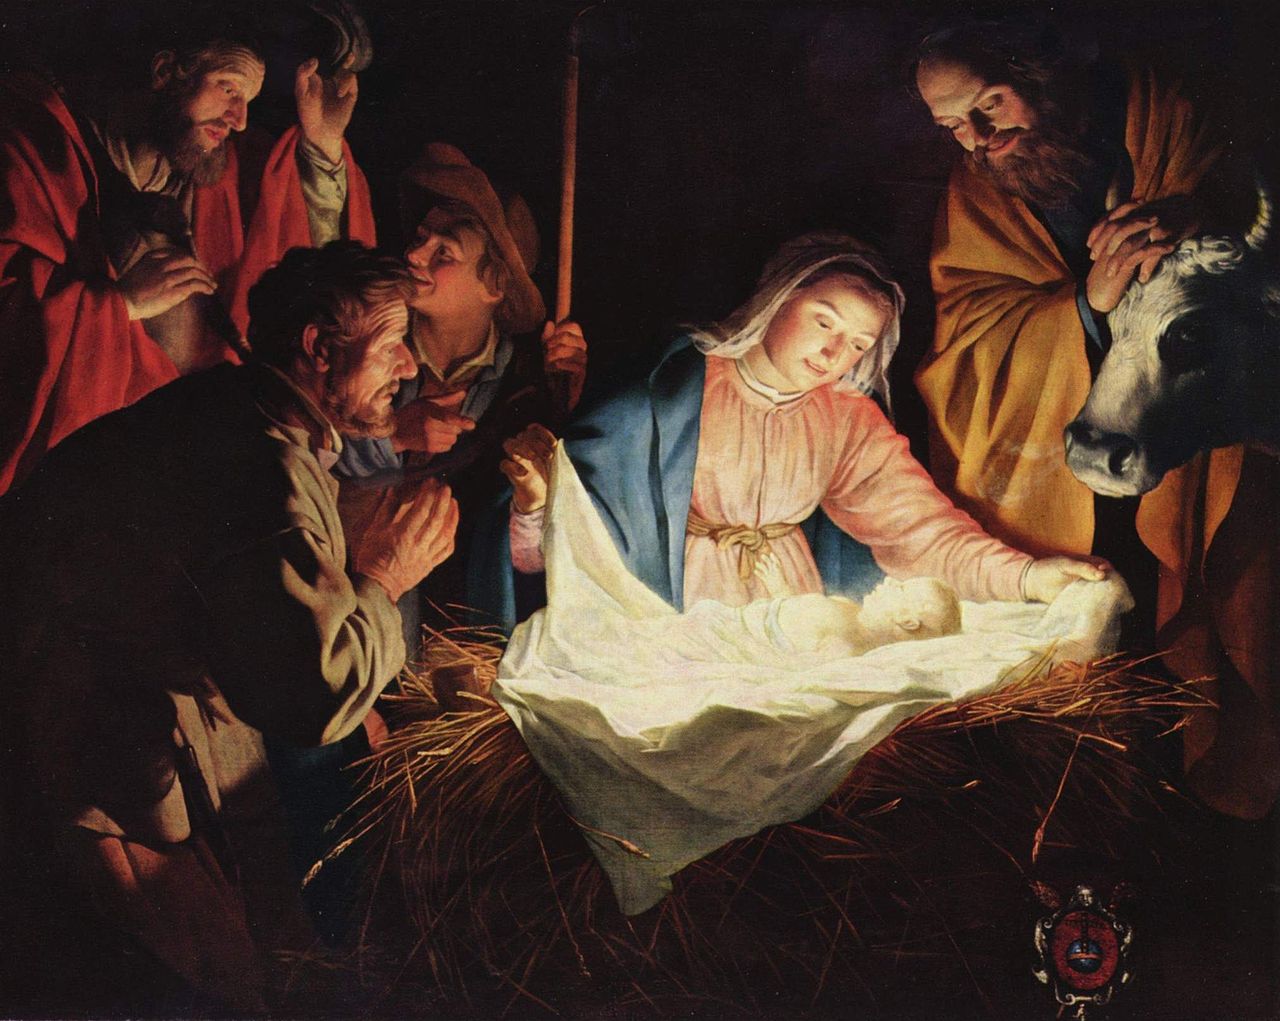 The Adoration of the Shepherds (1622) by Gerard van Honthorst